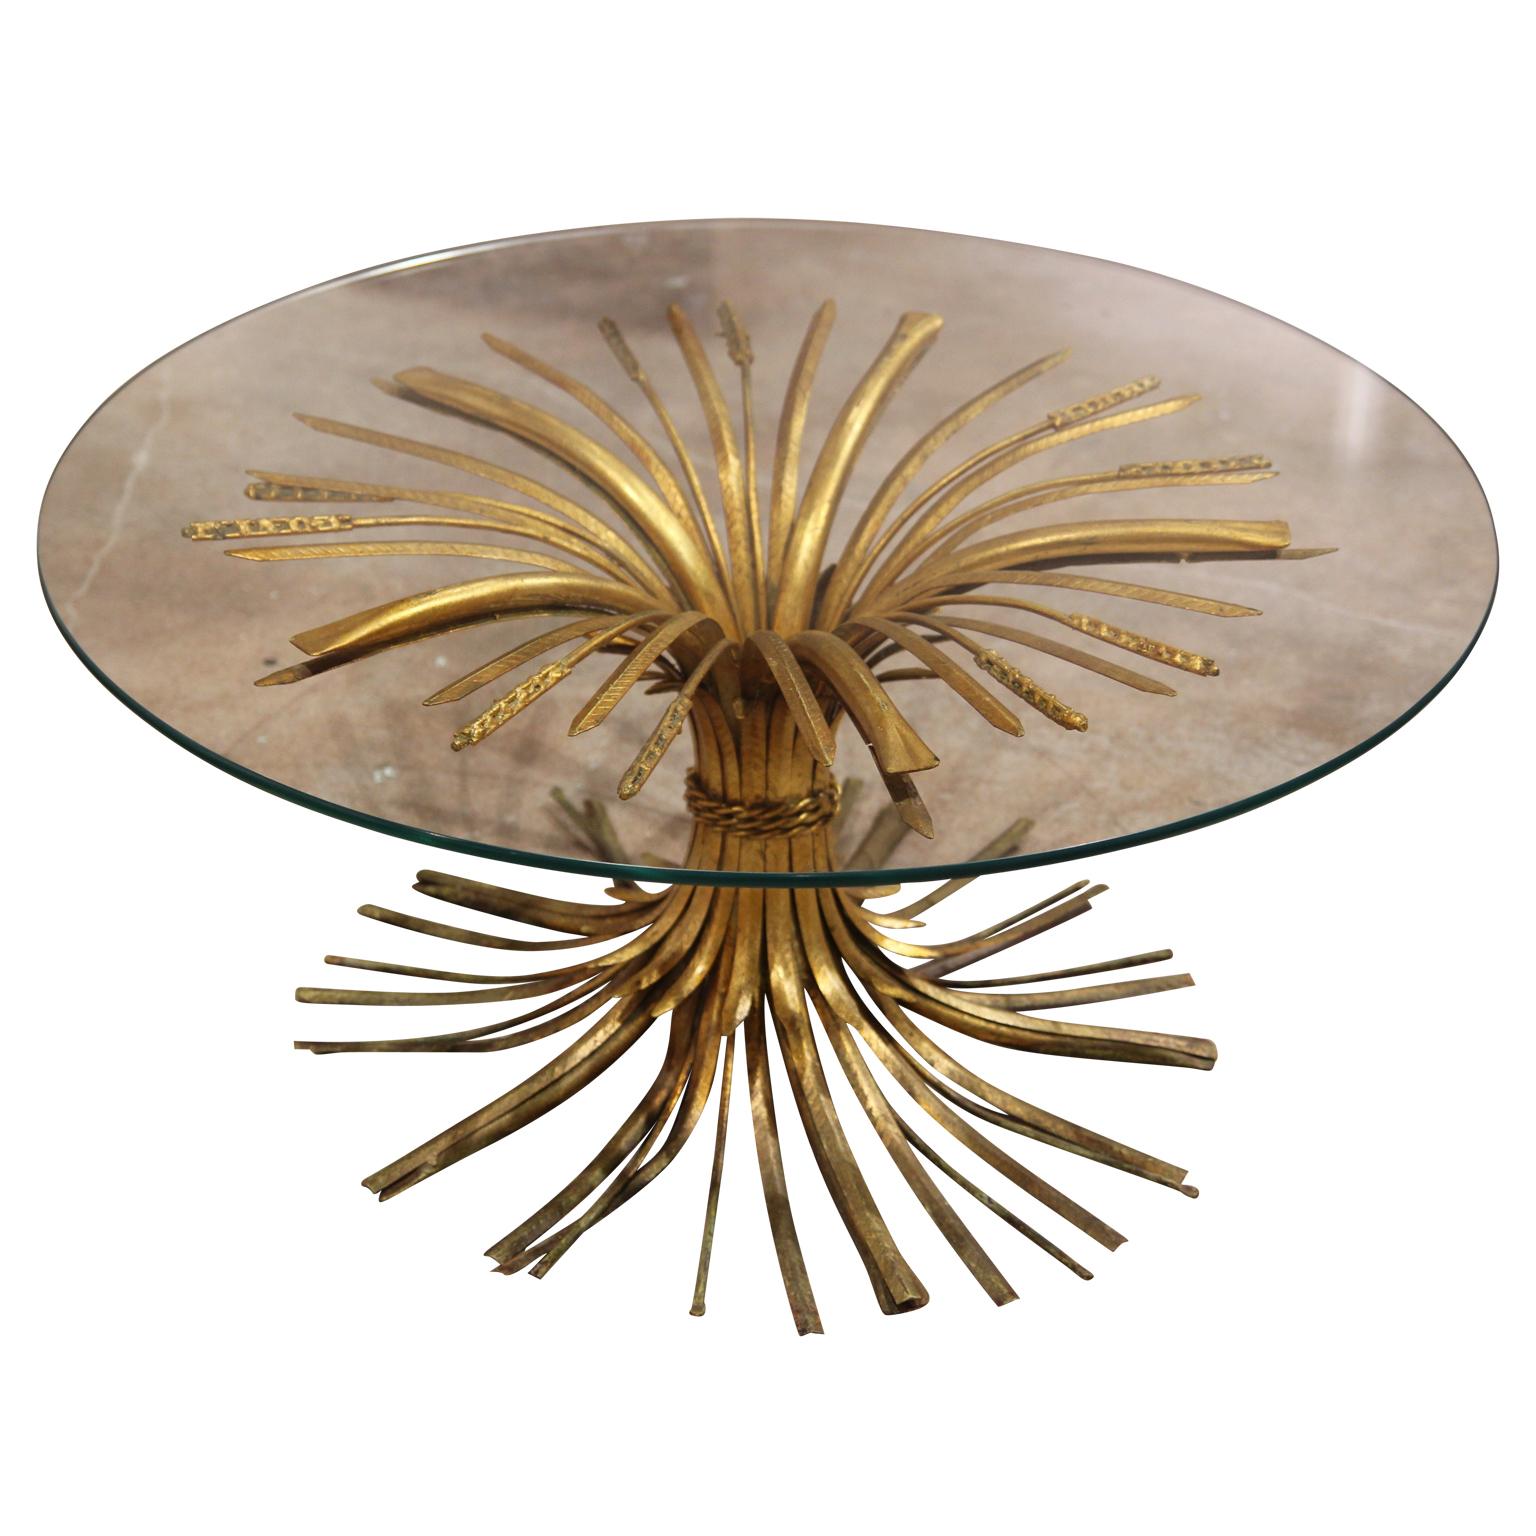 Hollywood Regency Italian Wheat Sheaf Side Table in Antique Gold Finish with Round Glass Top